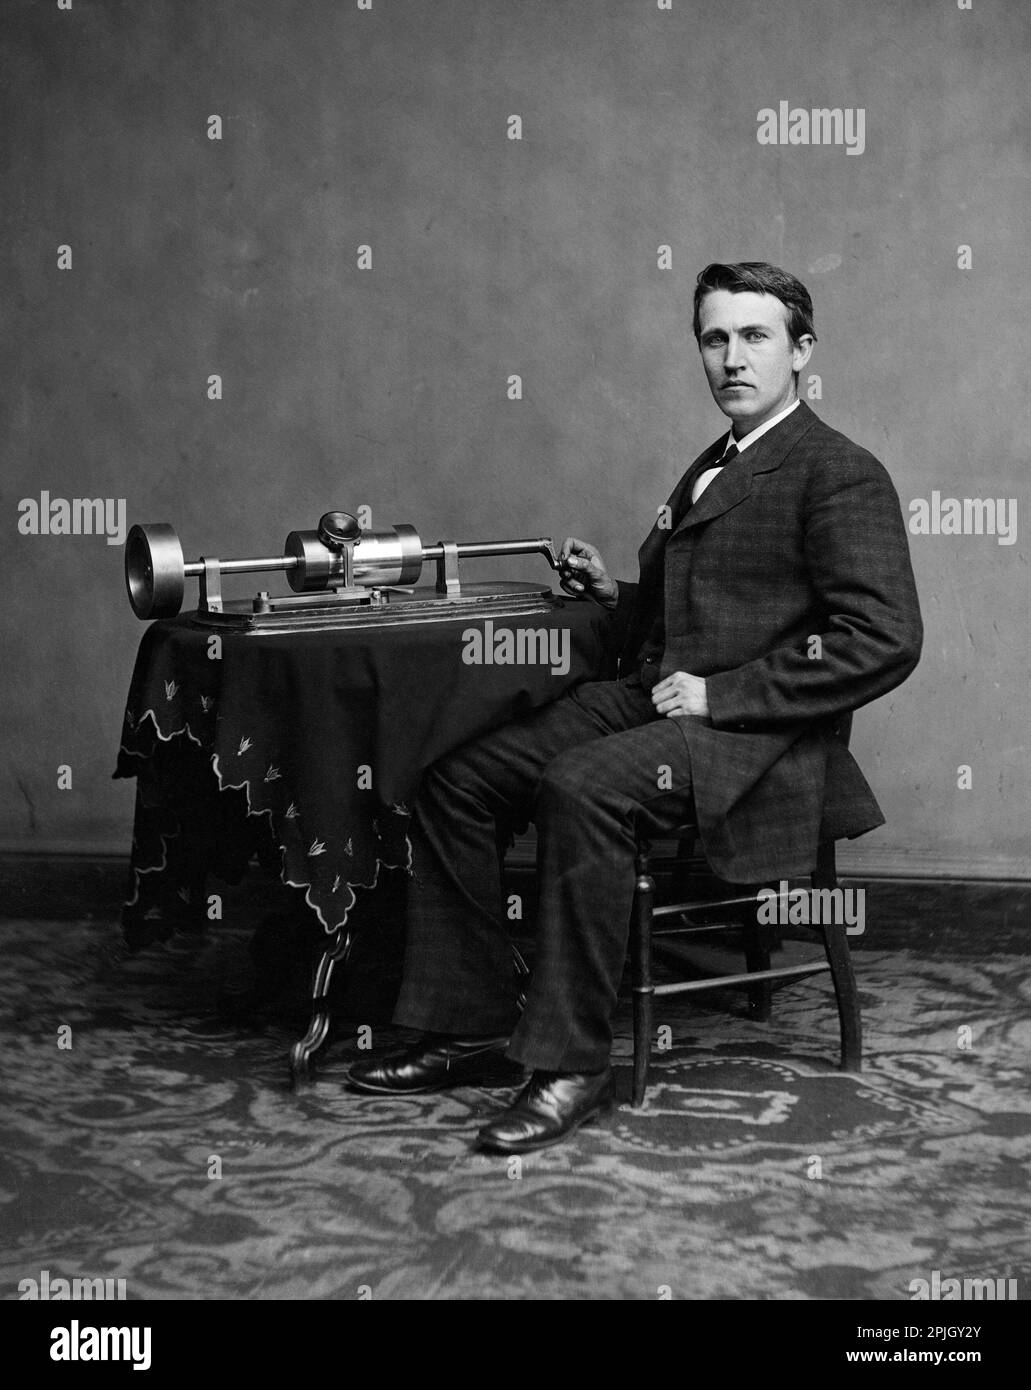 A portrait photograph of Thomas Edison and phonograph, by Levin Corbin Handy. c1877. Stock Photo